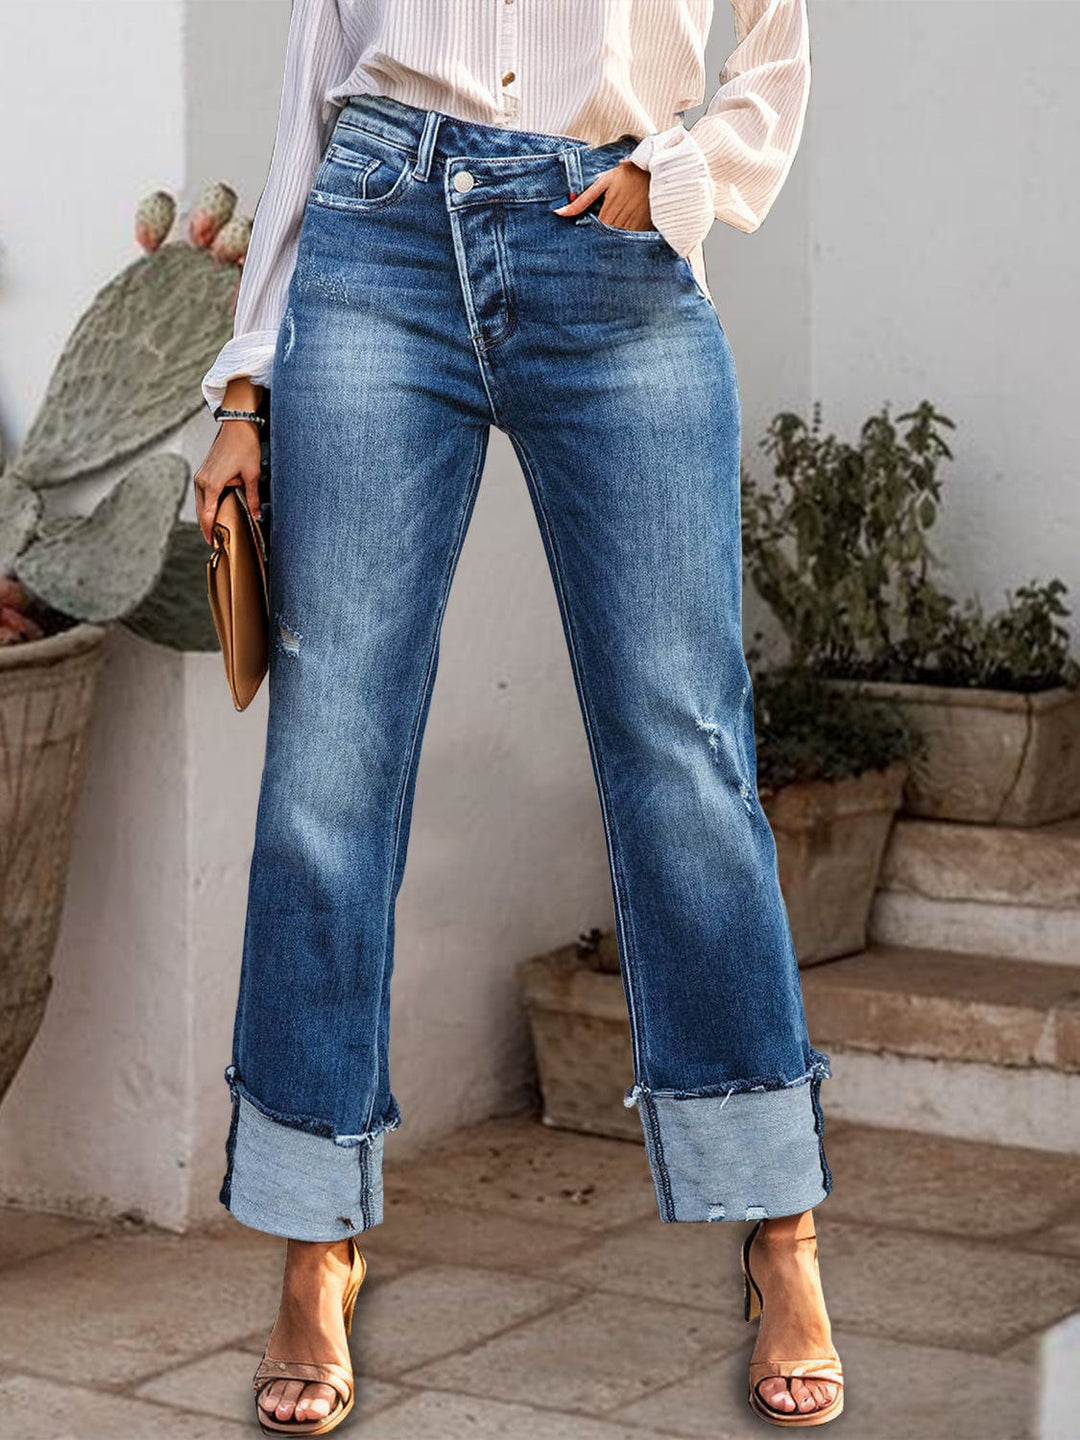 The802Gypsy Bottoms/Jeans Medium / S GYPSY-Stepped Waist Raw Hem Rolled Straight Jeans